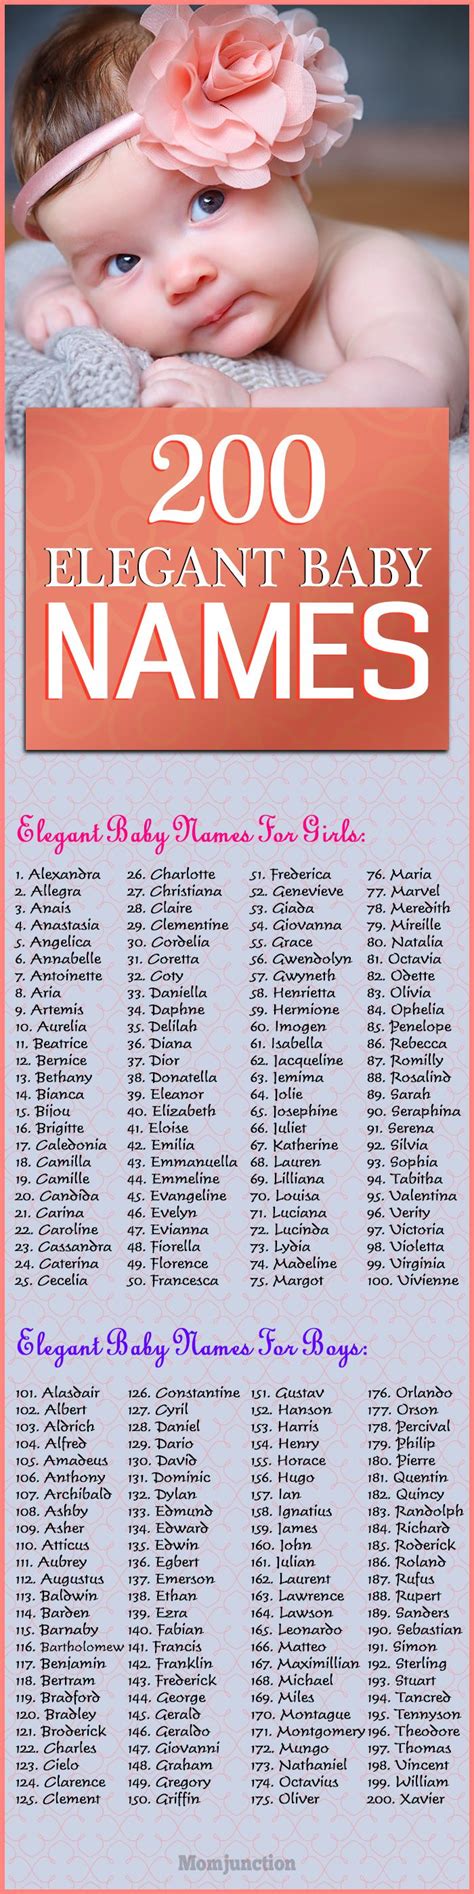 200 Elegant Baby Names That Are Posh And Fancy